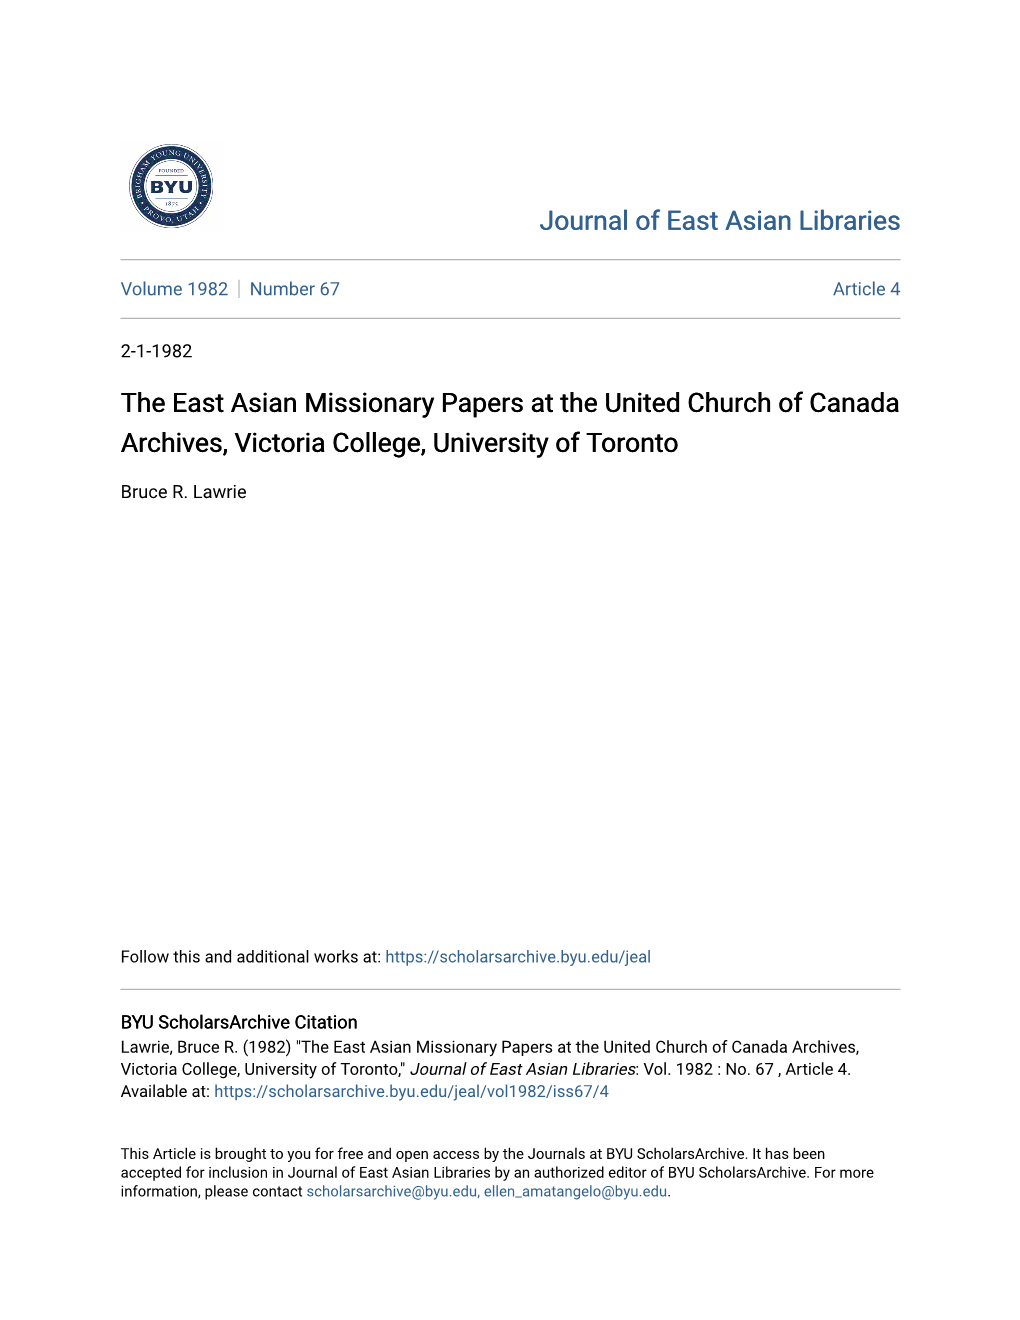 The East Asian Missionary Papers at the United Church of Canada Archives, Victoria College, University of Toronto